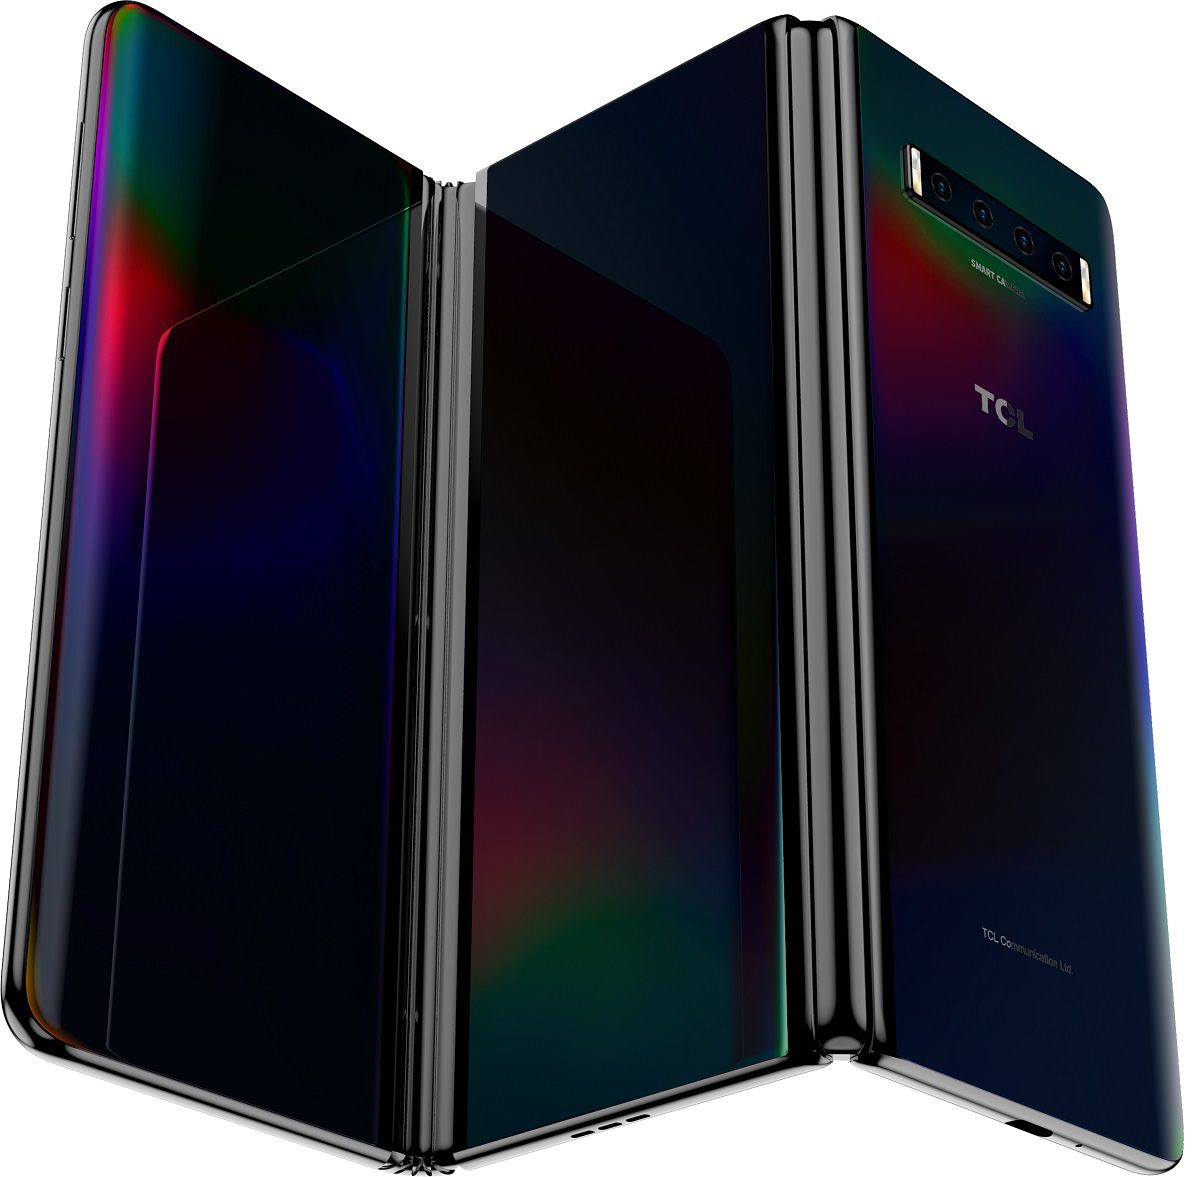 TCL showcases its tri-folding display smartphone concept